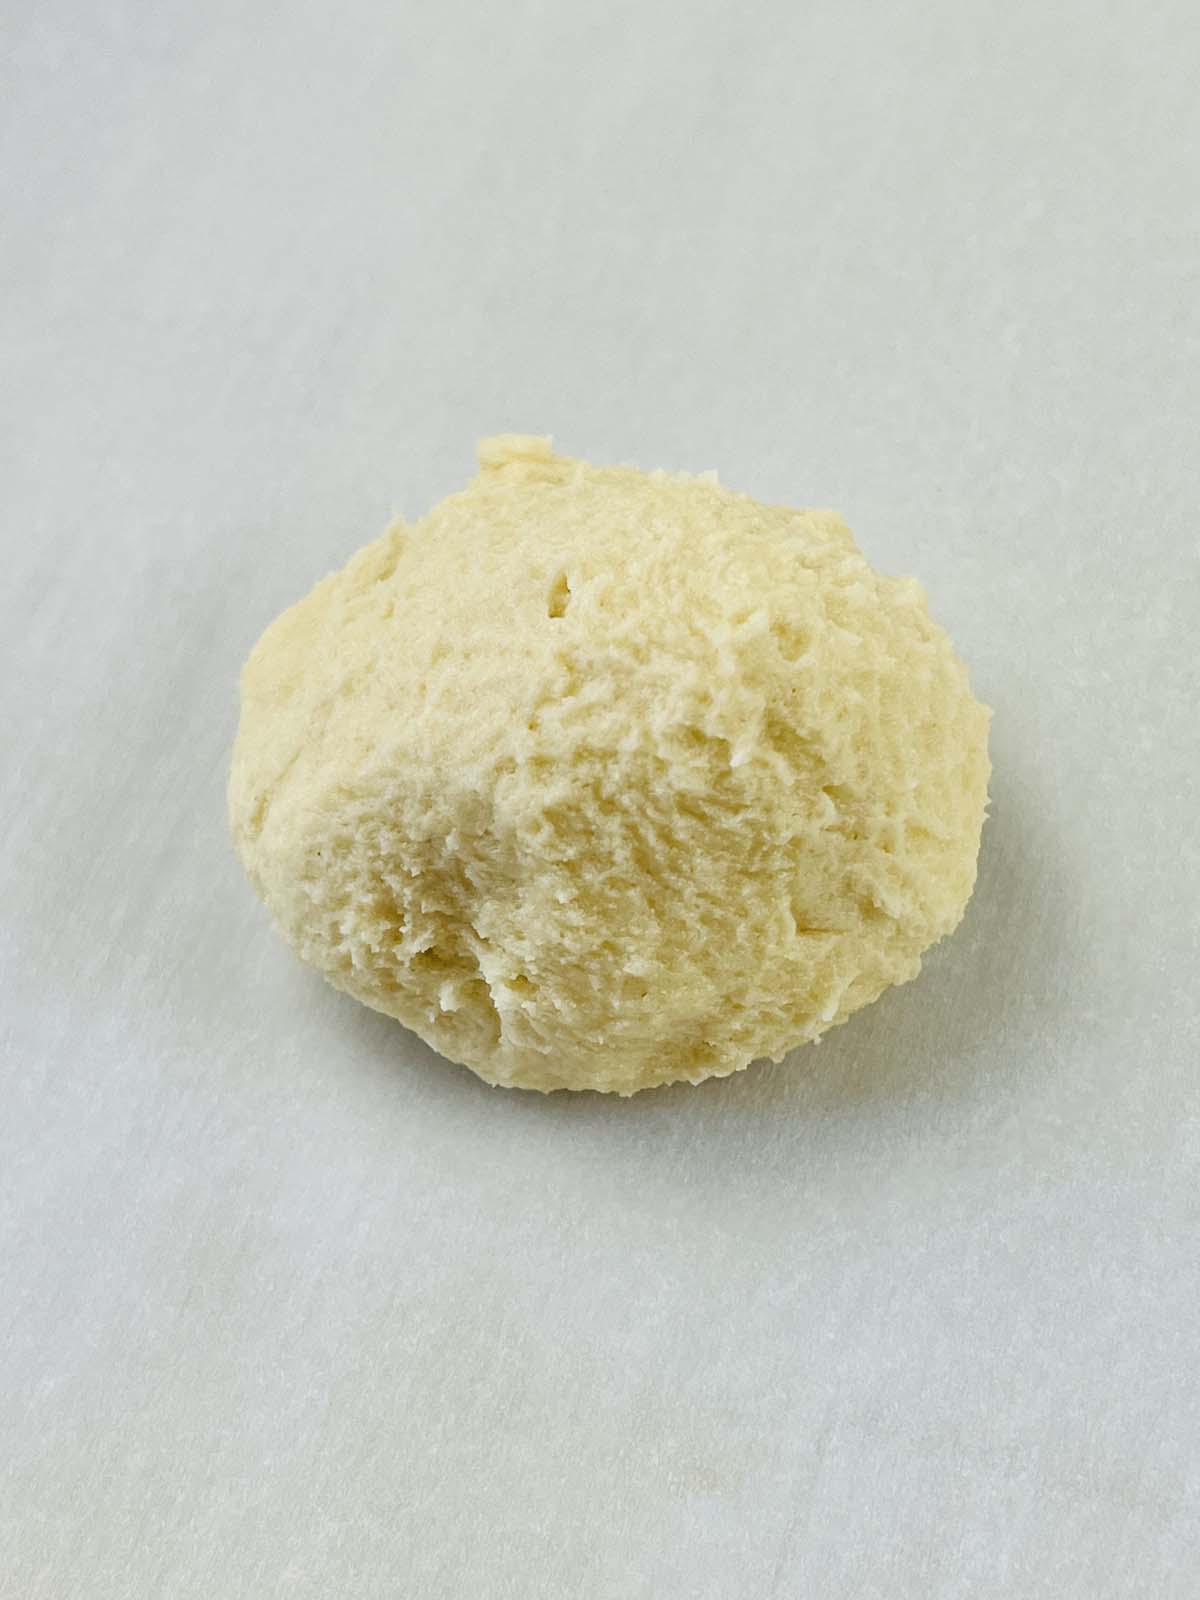 A rounded drop of cookie dough on parchment paper.